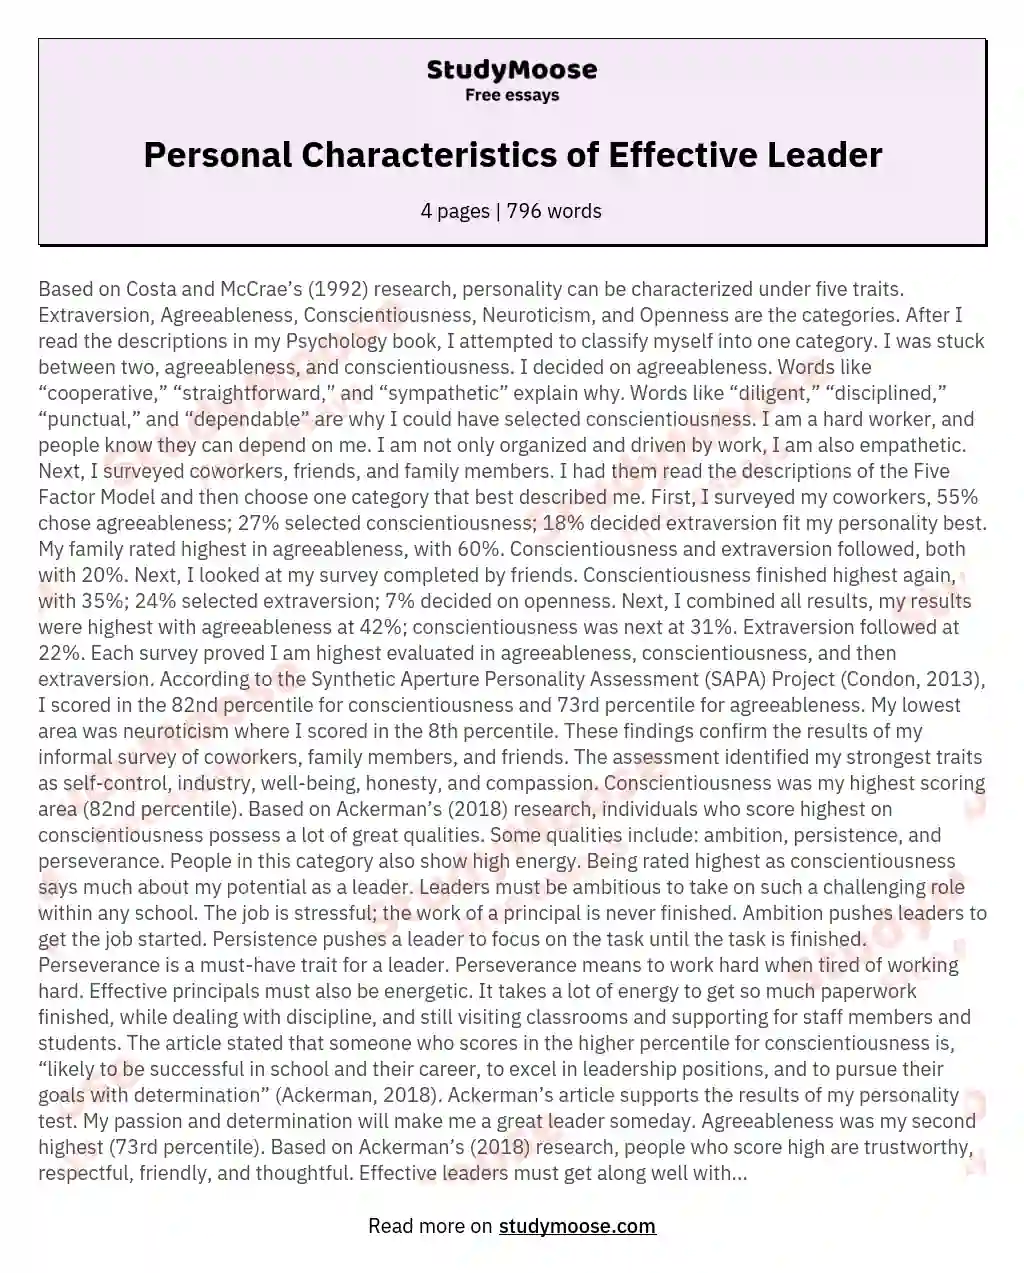 Personal Characteristics of Effective Leader essay